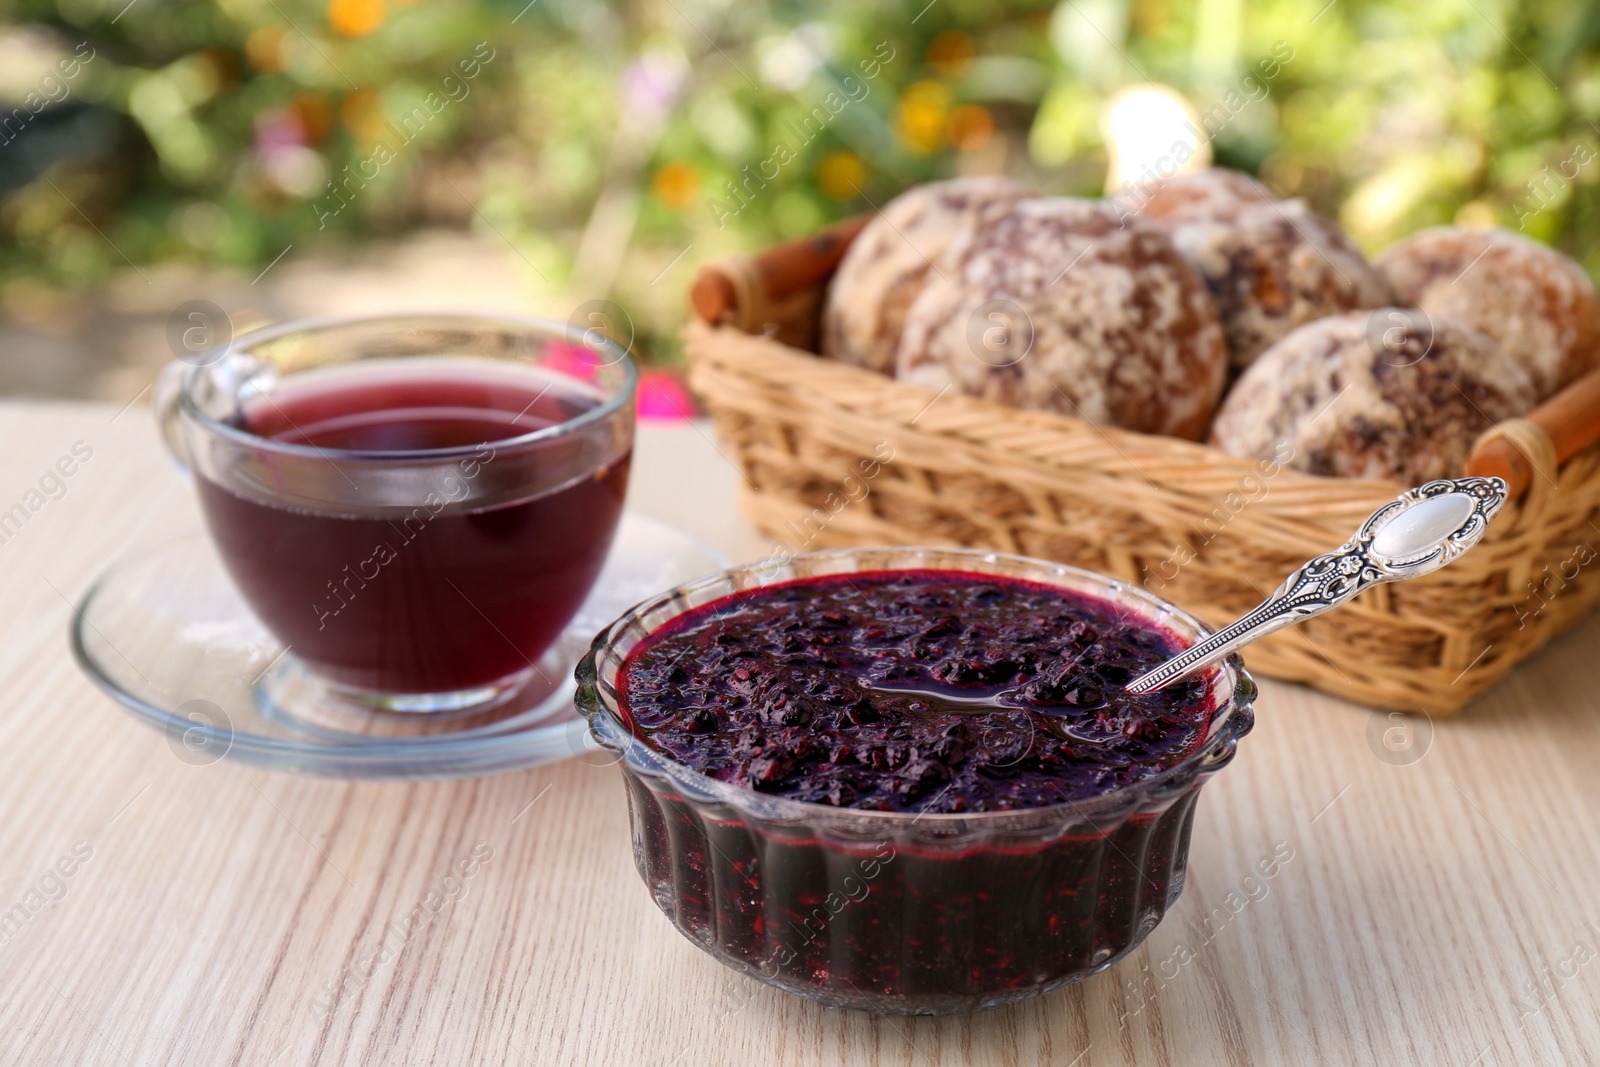 Photo of Elderberry (Sambucus) jam, glass cup of tea and tasty cookies on wooden table outdoors